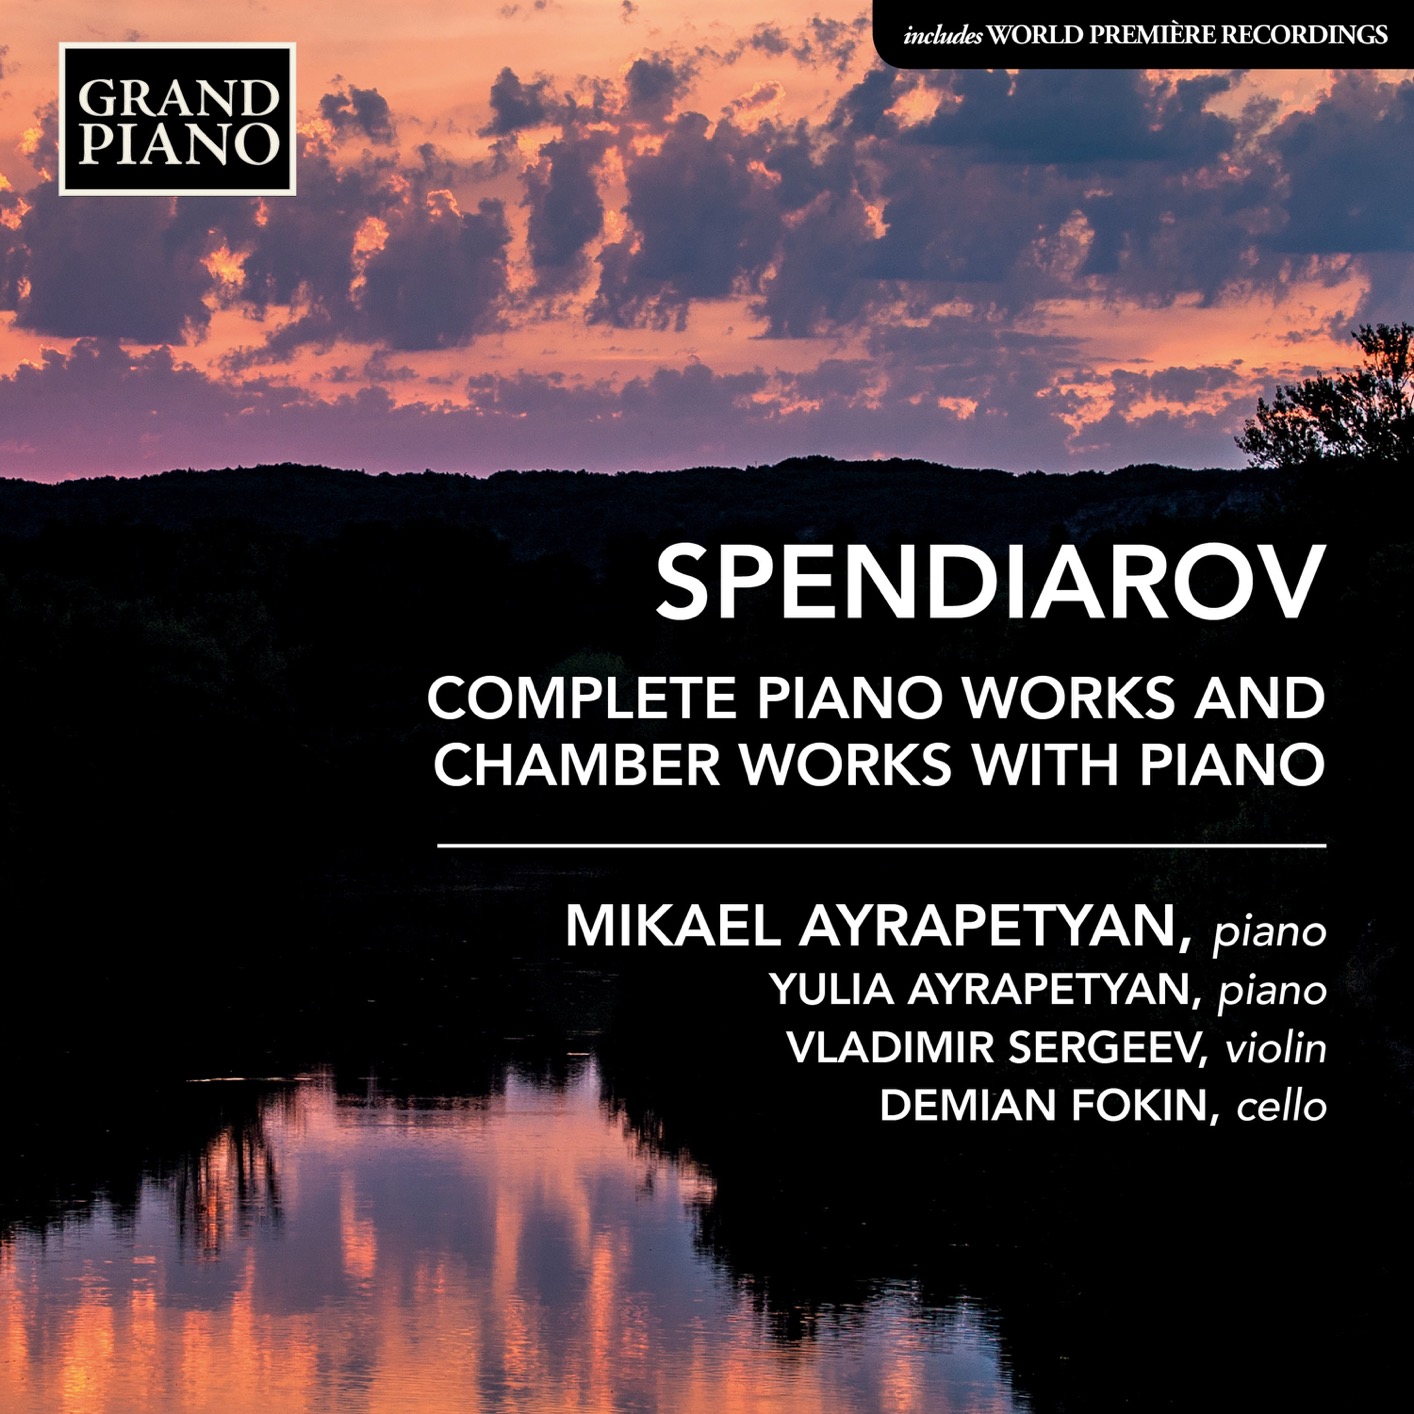 Mikael Ayrapetyan – Spendiarov – Complete Piano Works & Chamber Works with Piano (2021) [FLAC 24bit/48kHz]